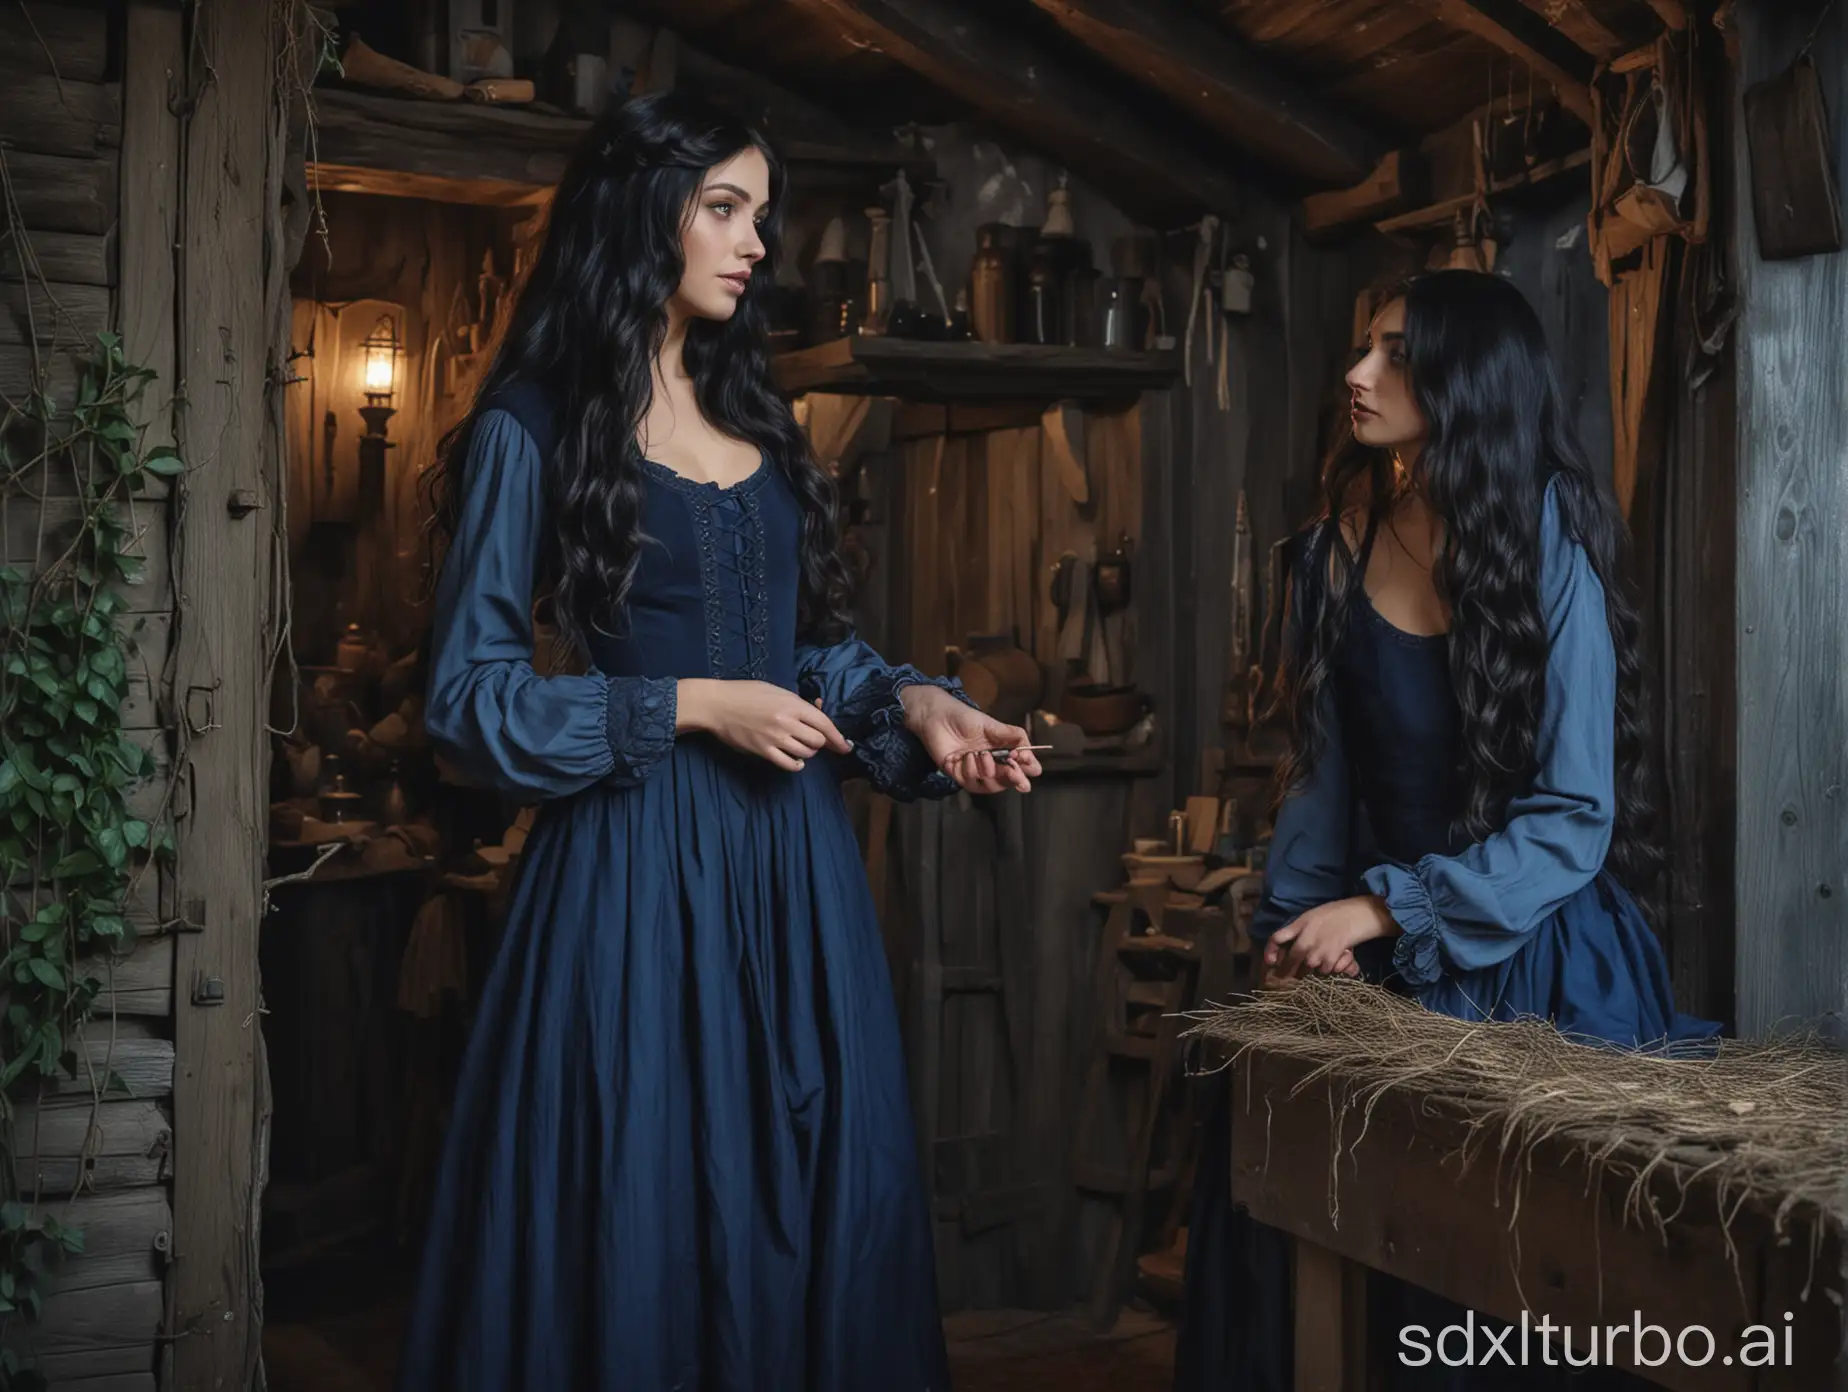 Enchanting-Encounter-Twilight-Conversation-Between-Young-Woman-and-Wise-Elder-in-Medieval-Forest-Cottage